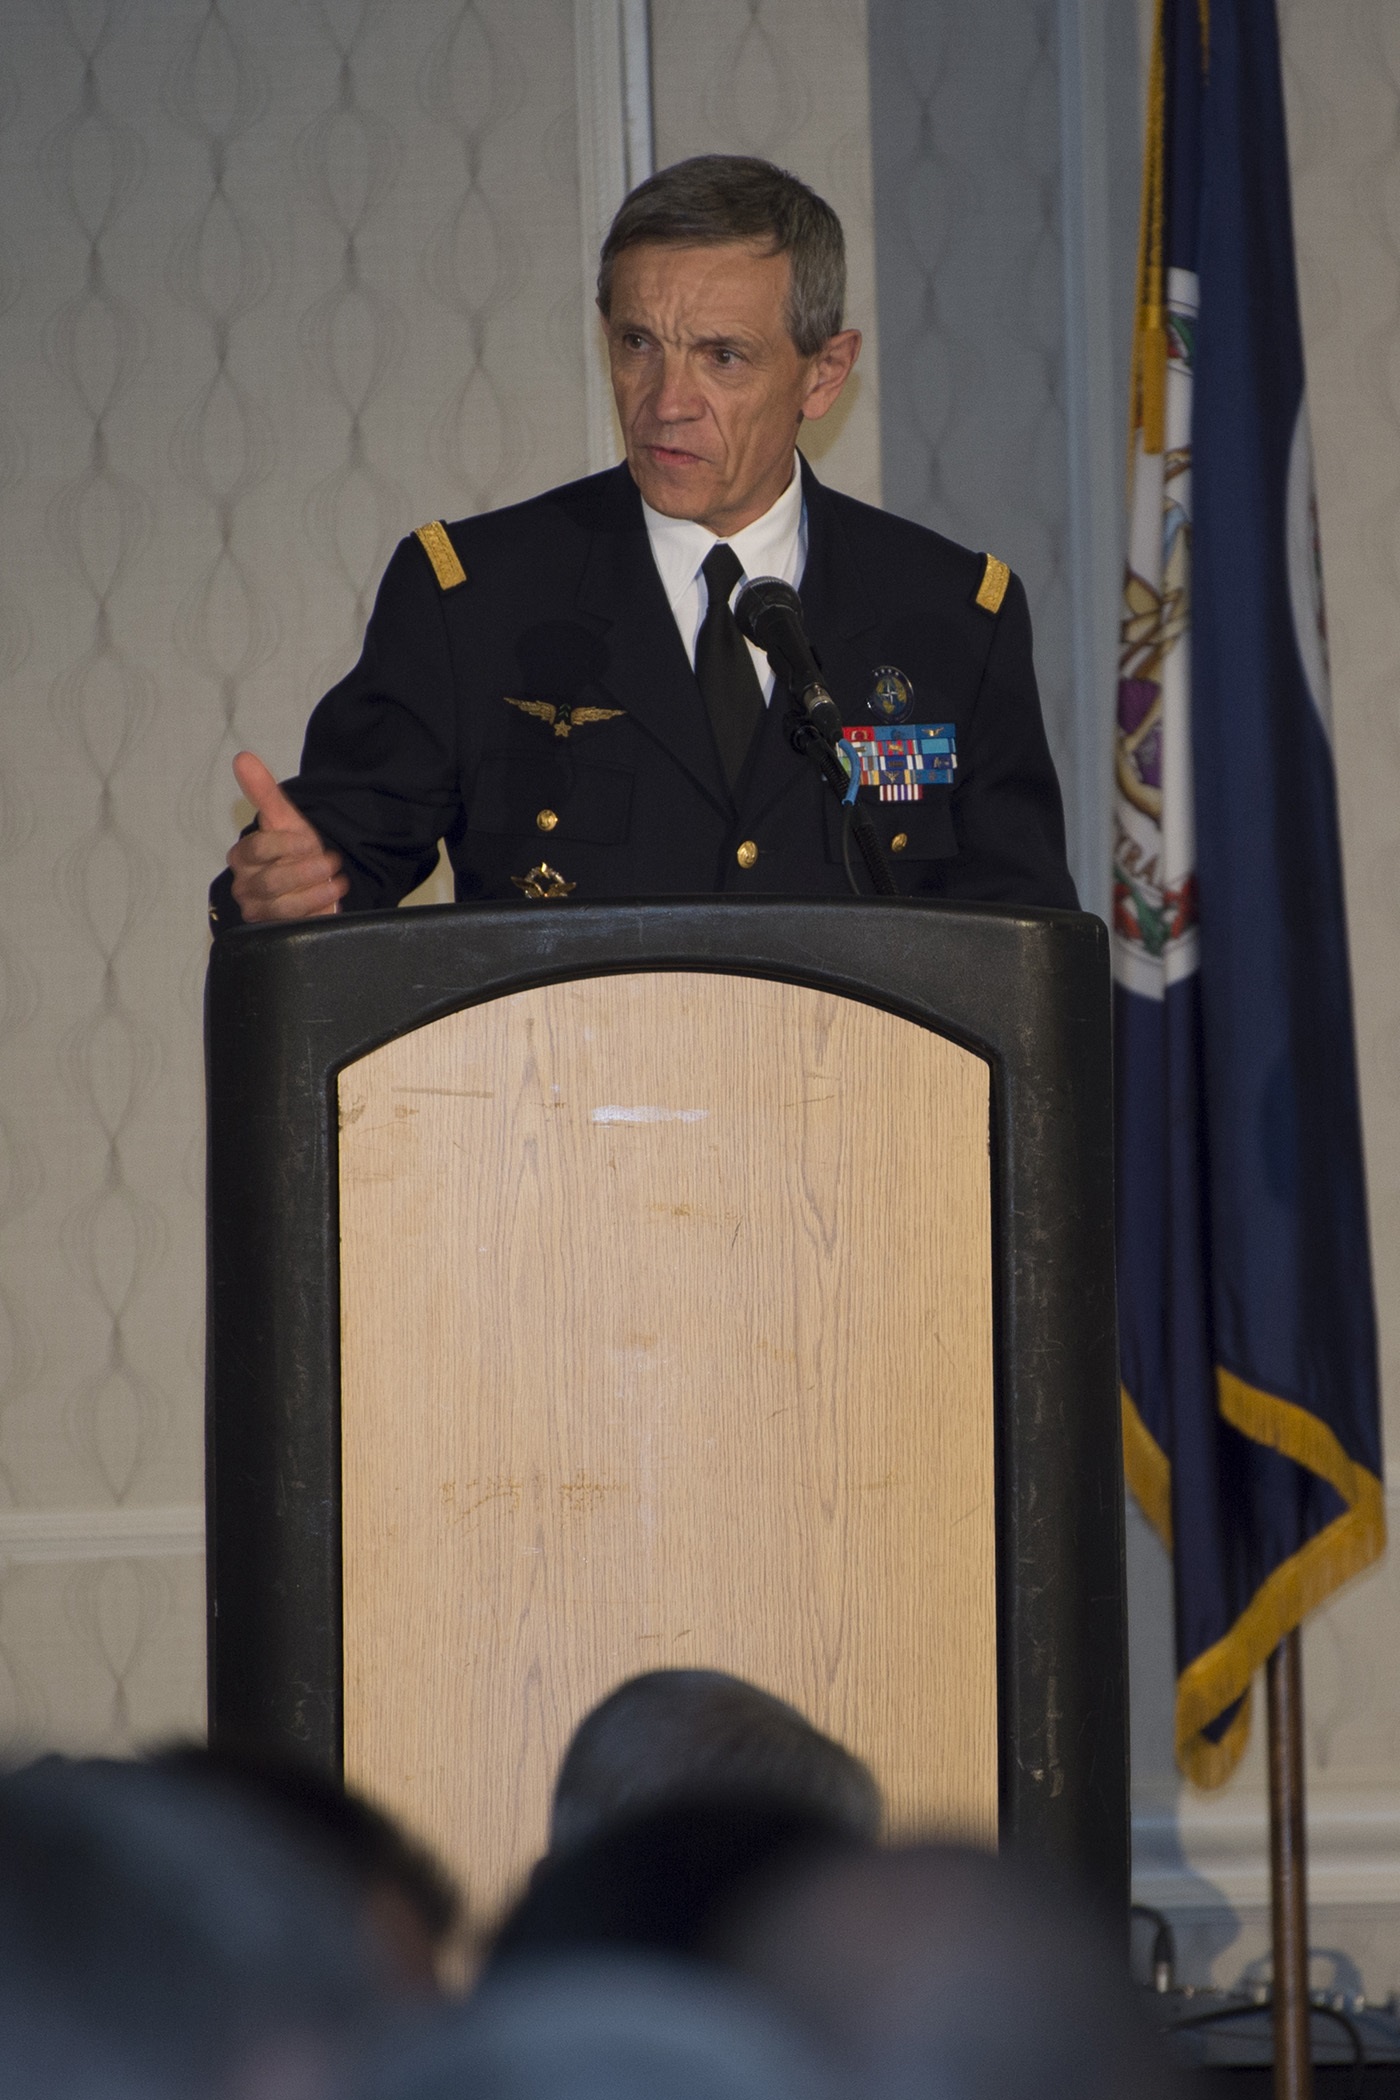 Supreme Allied Commander Transformation (SACT) French Air Force General Jean-Paul Paloméros addressing the audience at the Industry Engages NATO Symposium April 14. NATO ACT photo